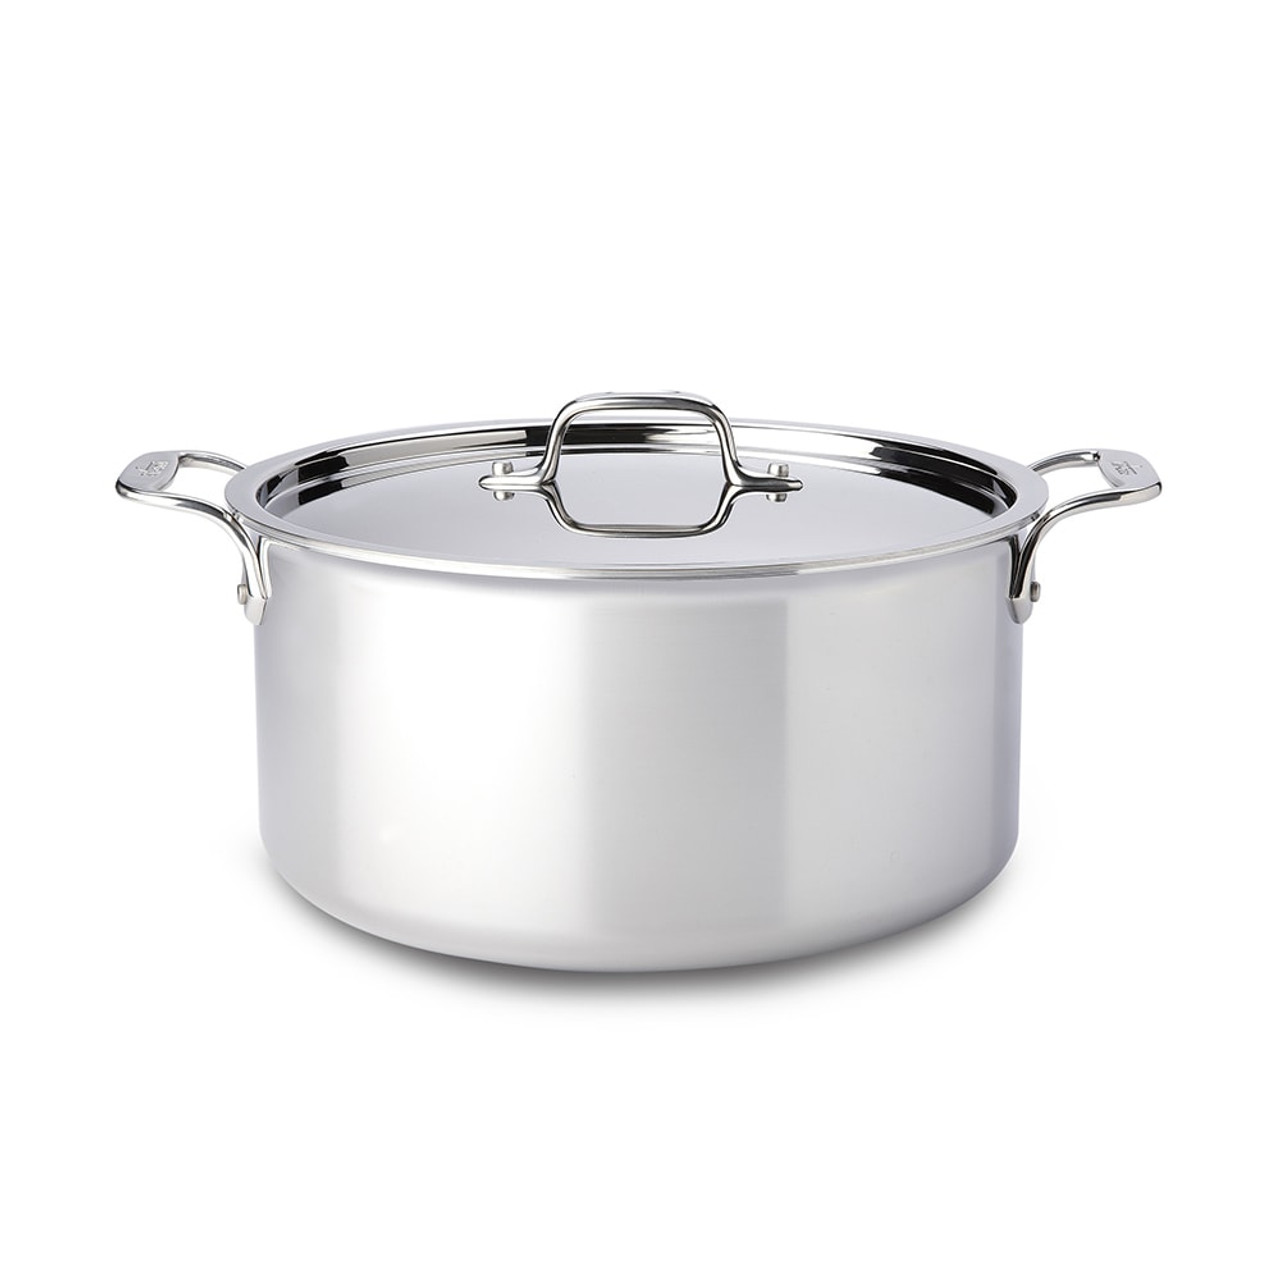 https://cdn11.bigcommerce.com/s-hccytny0od/images/stencil/1280x1280/products/483/8418/all-clad-stainless-steel-stock-pot-8qt__25942.1555828103.jpg?c=2?imbypass=on